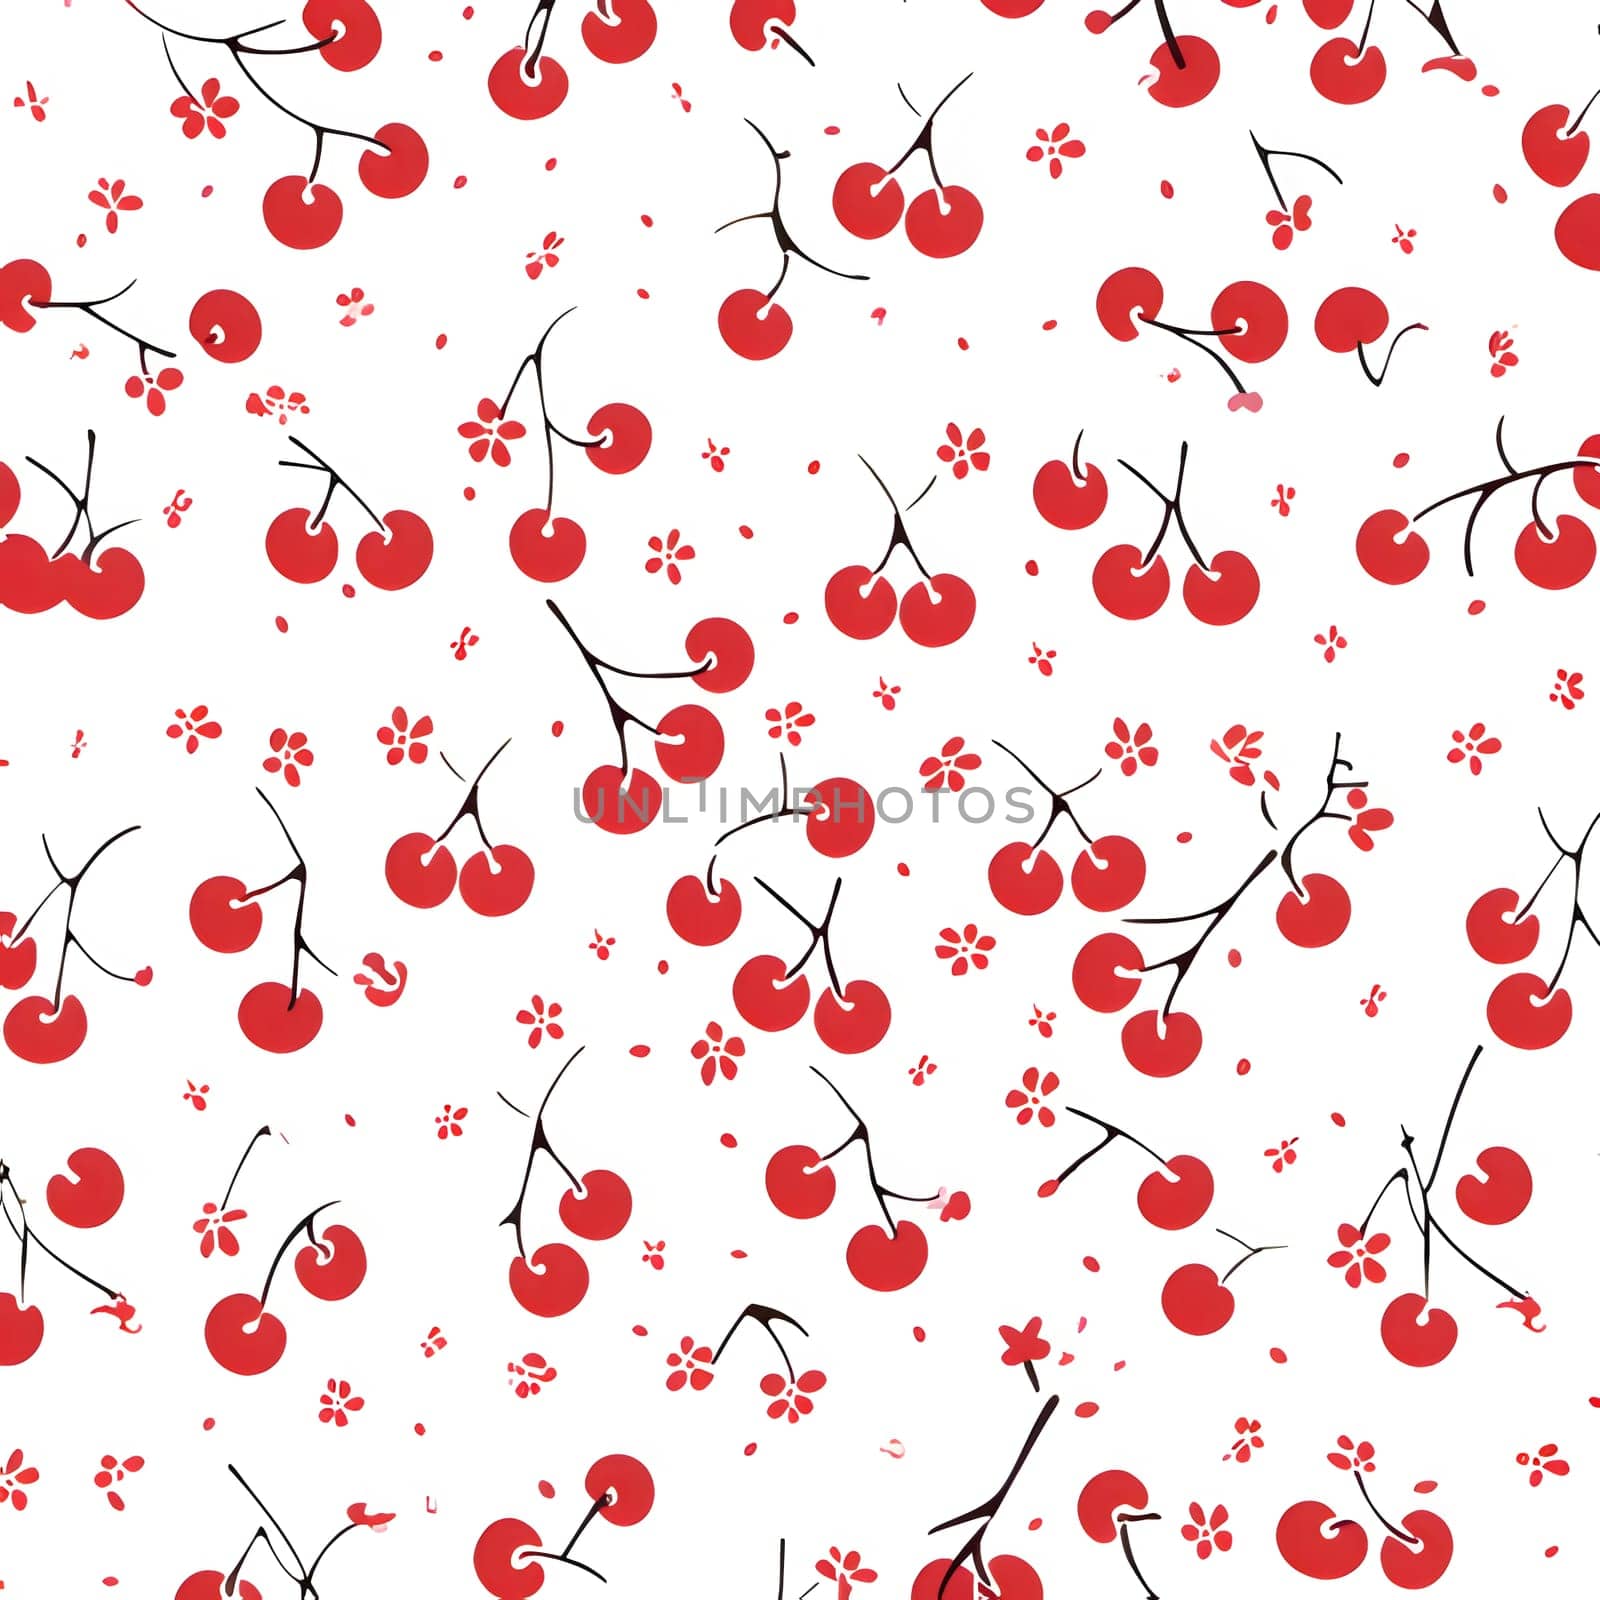 Patterns and banners backgrounds: Seamless pattern with red cherries on white background. Vector illustration.